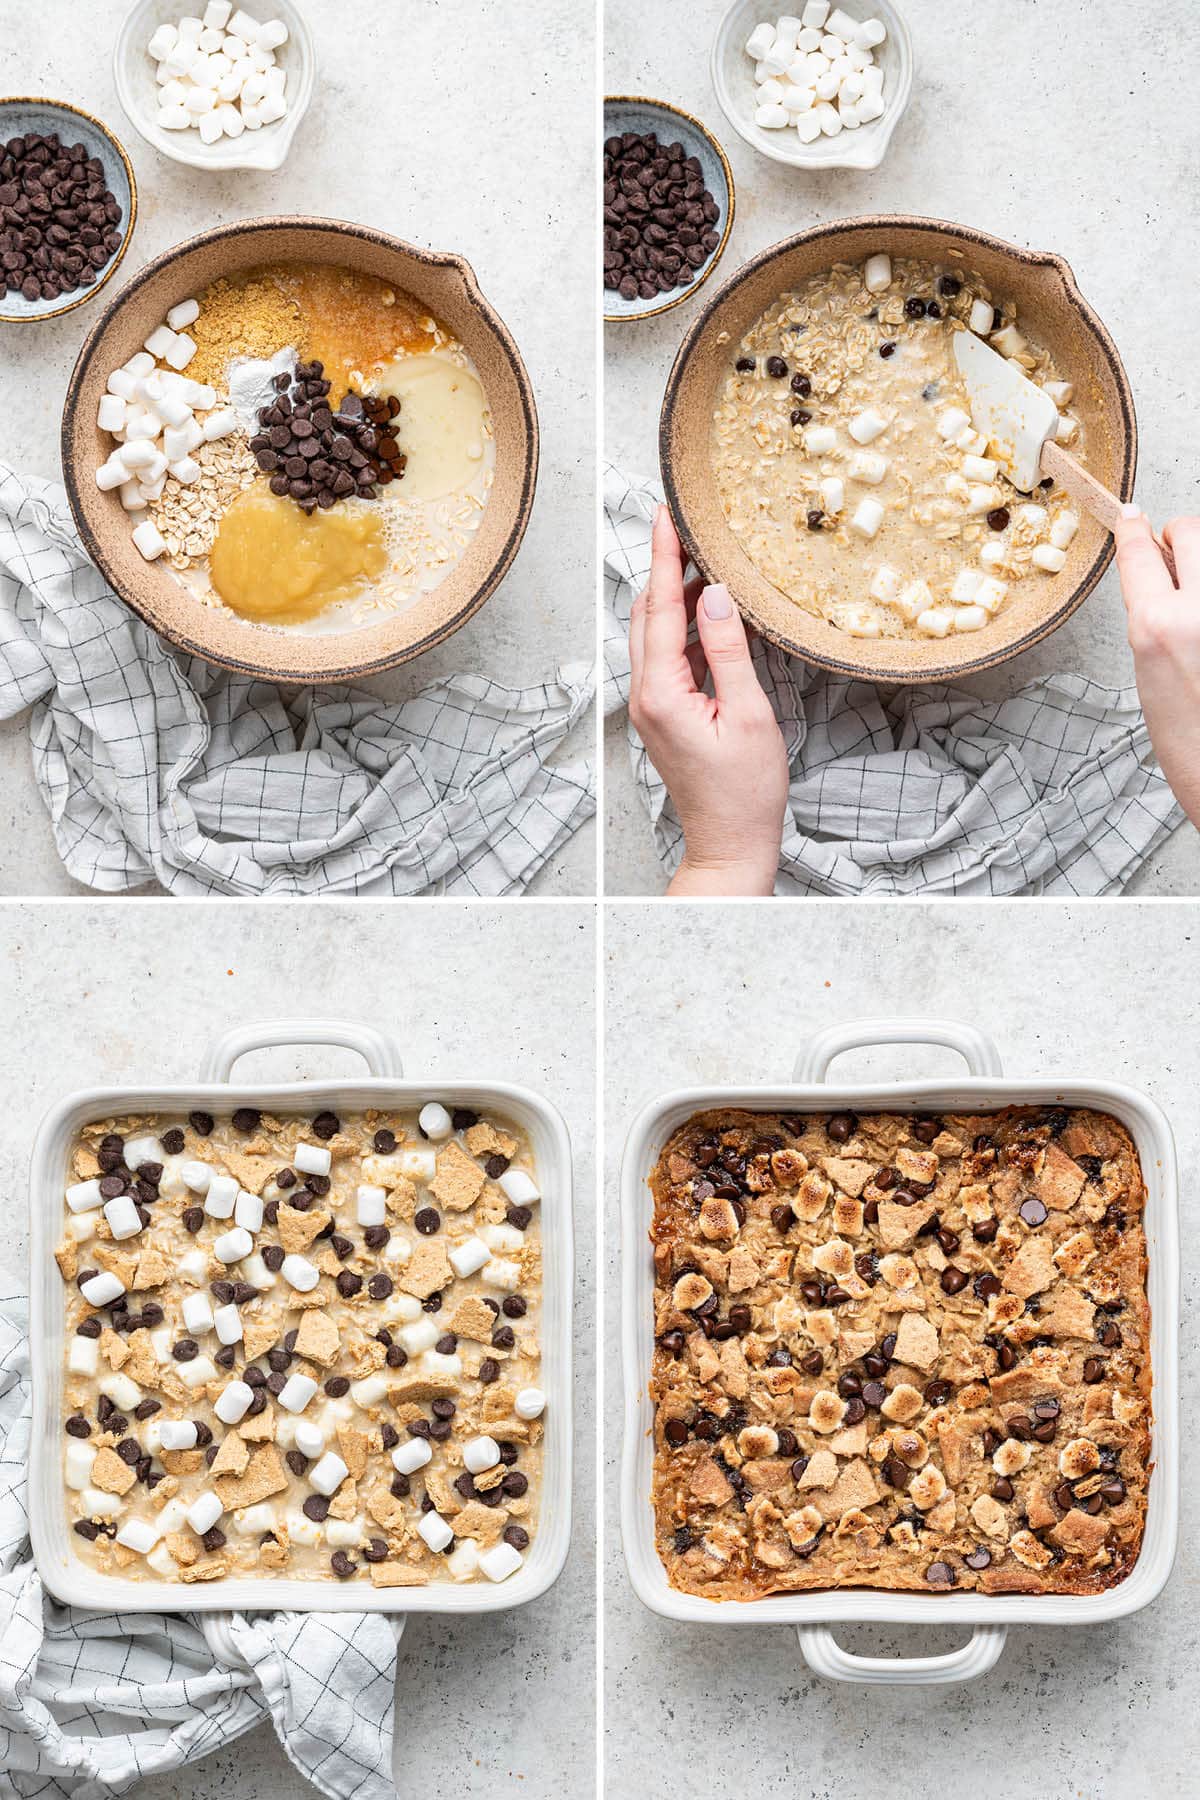 Collage of four photos showing the steps to make S'mores Baked Oatmeal: making the baked oatmeal ingredients in a mixing bowl and then baking it in a baking dish.